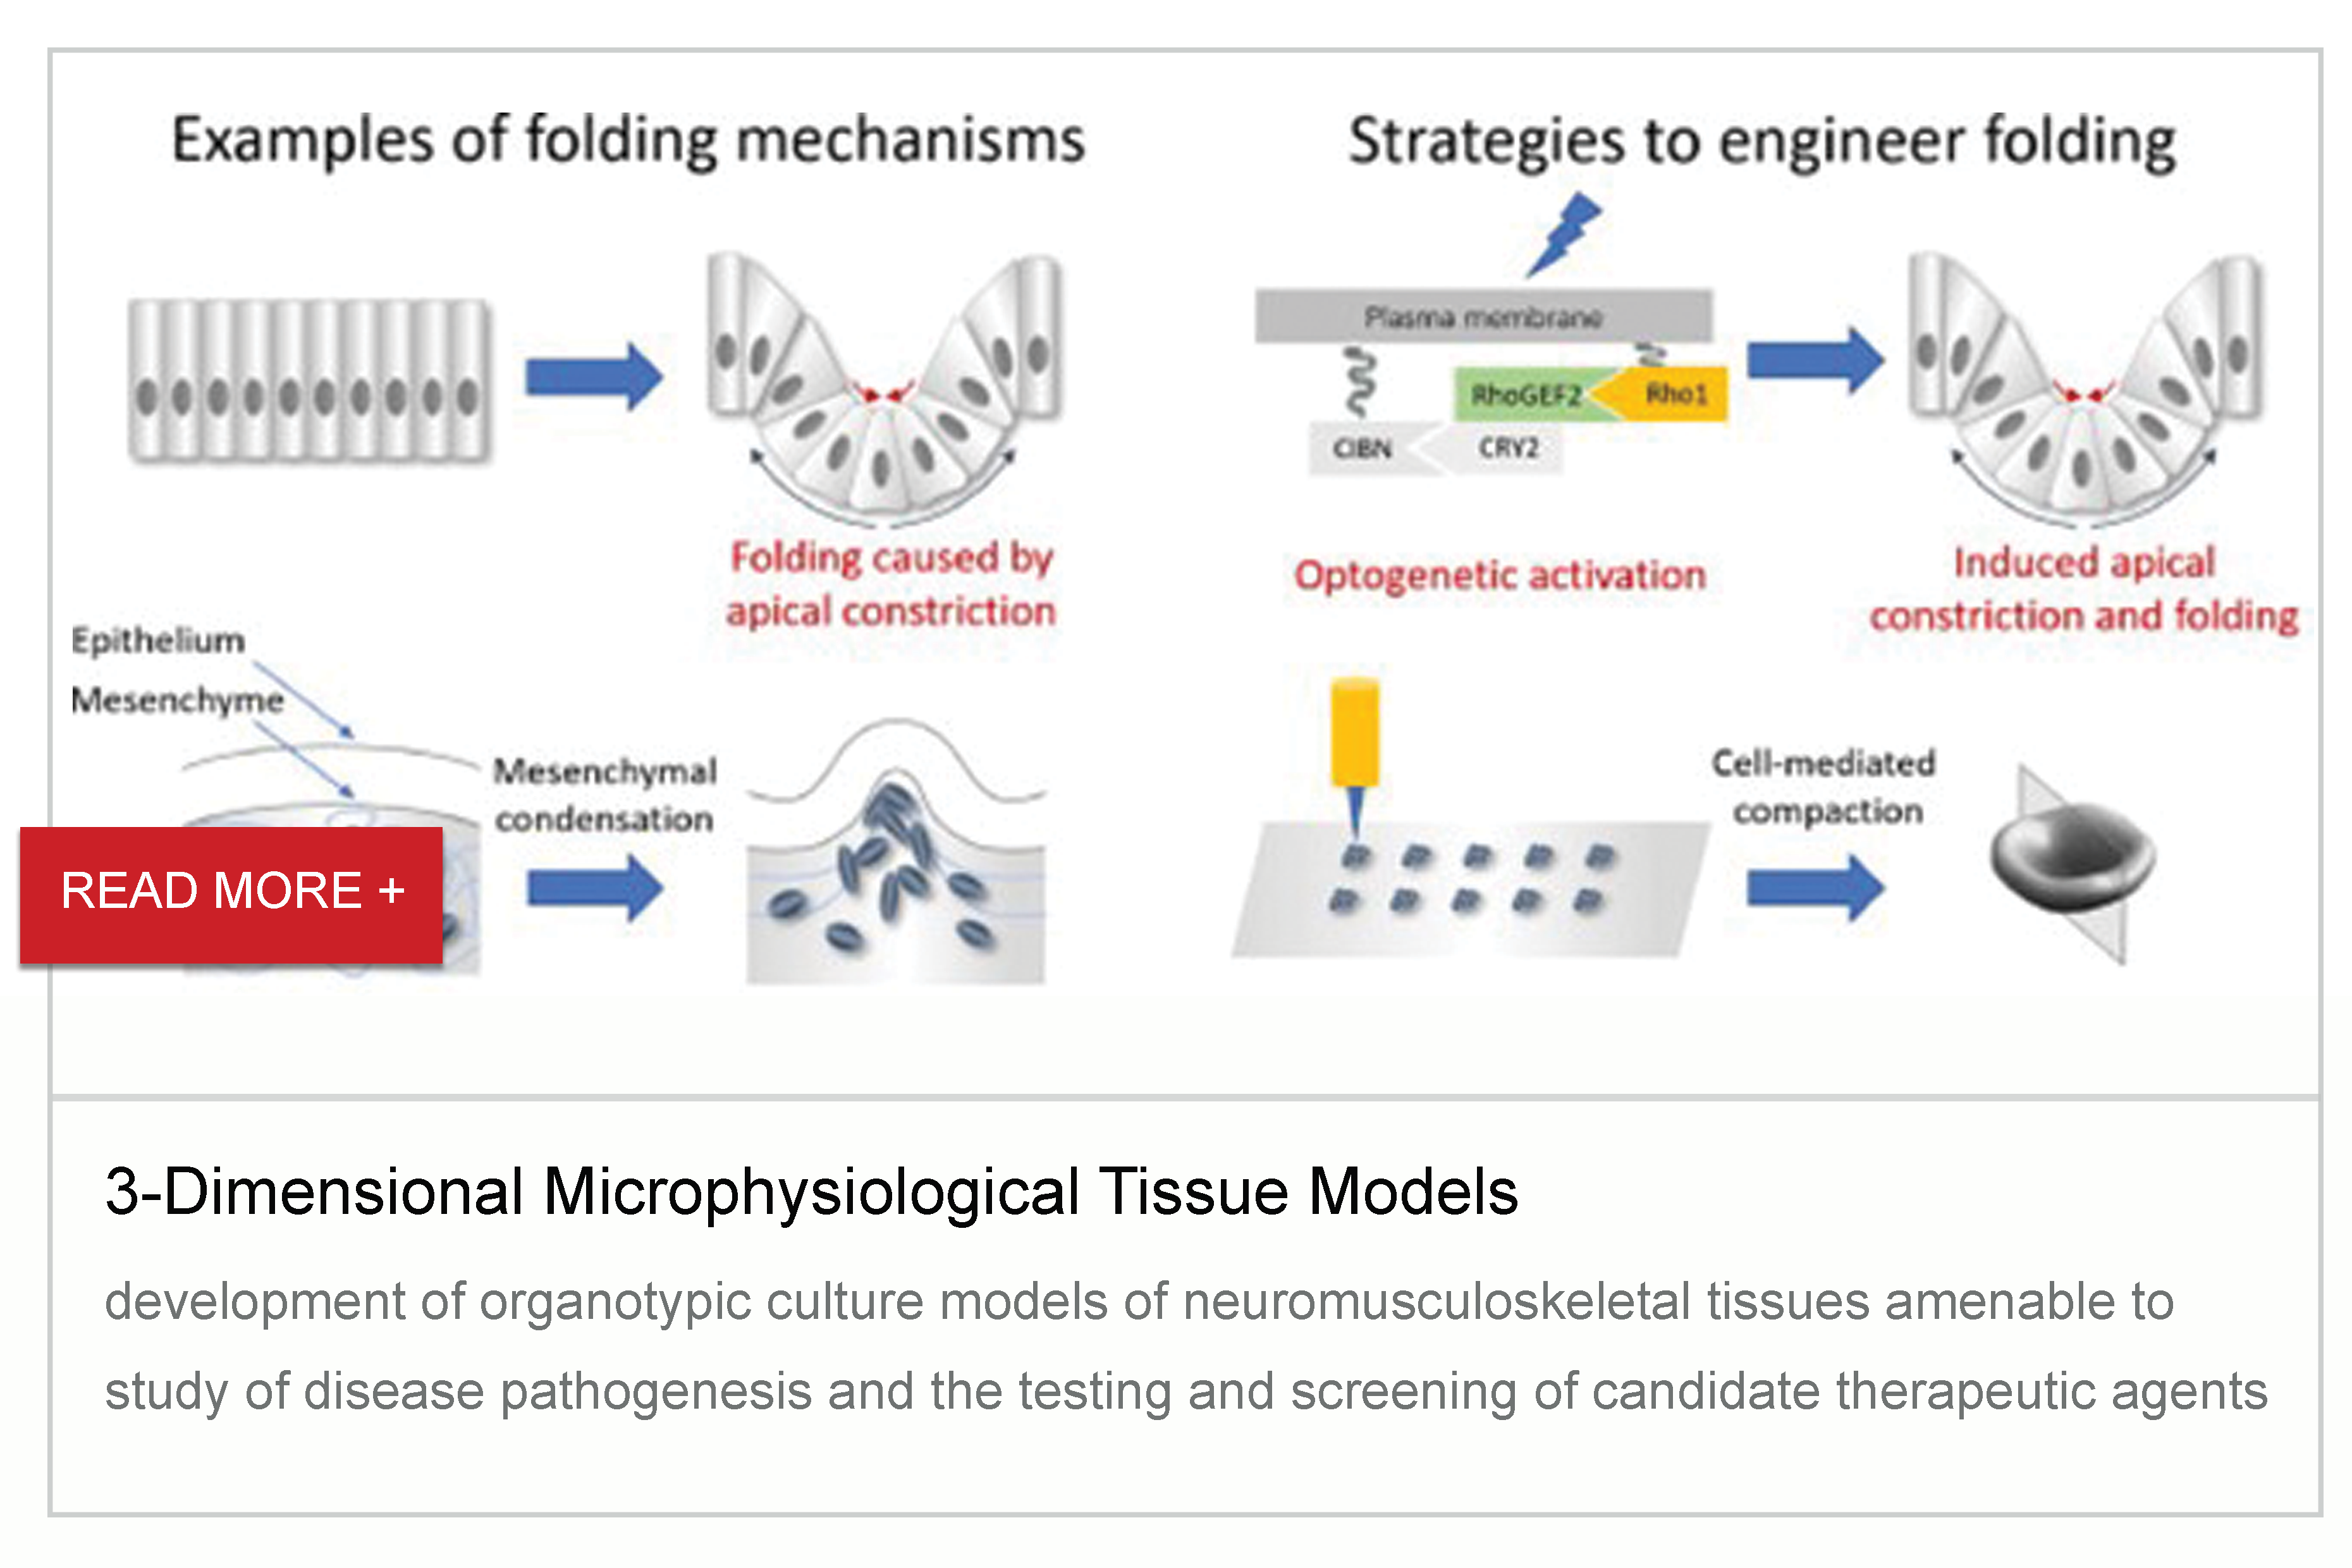 3-Dimensional Microphysiological Tissue Models